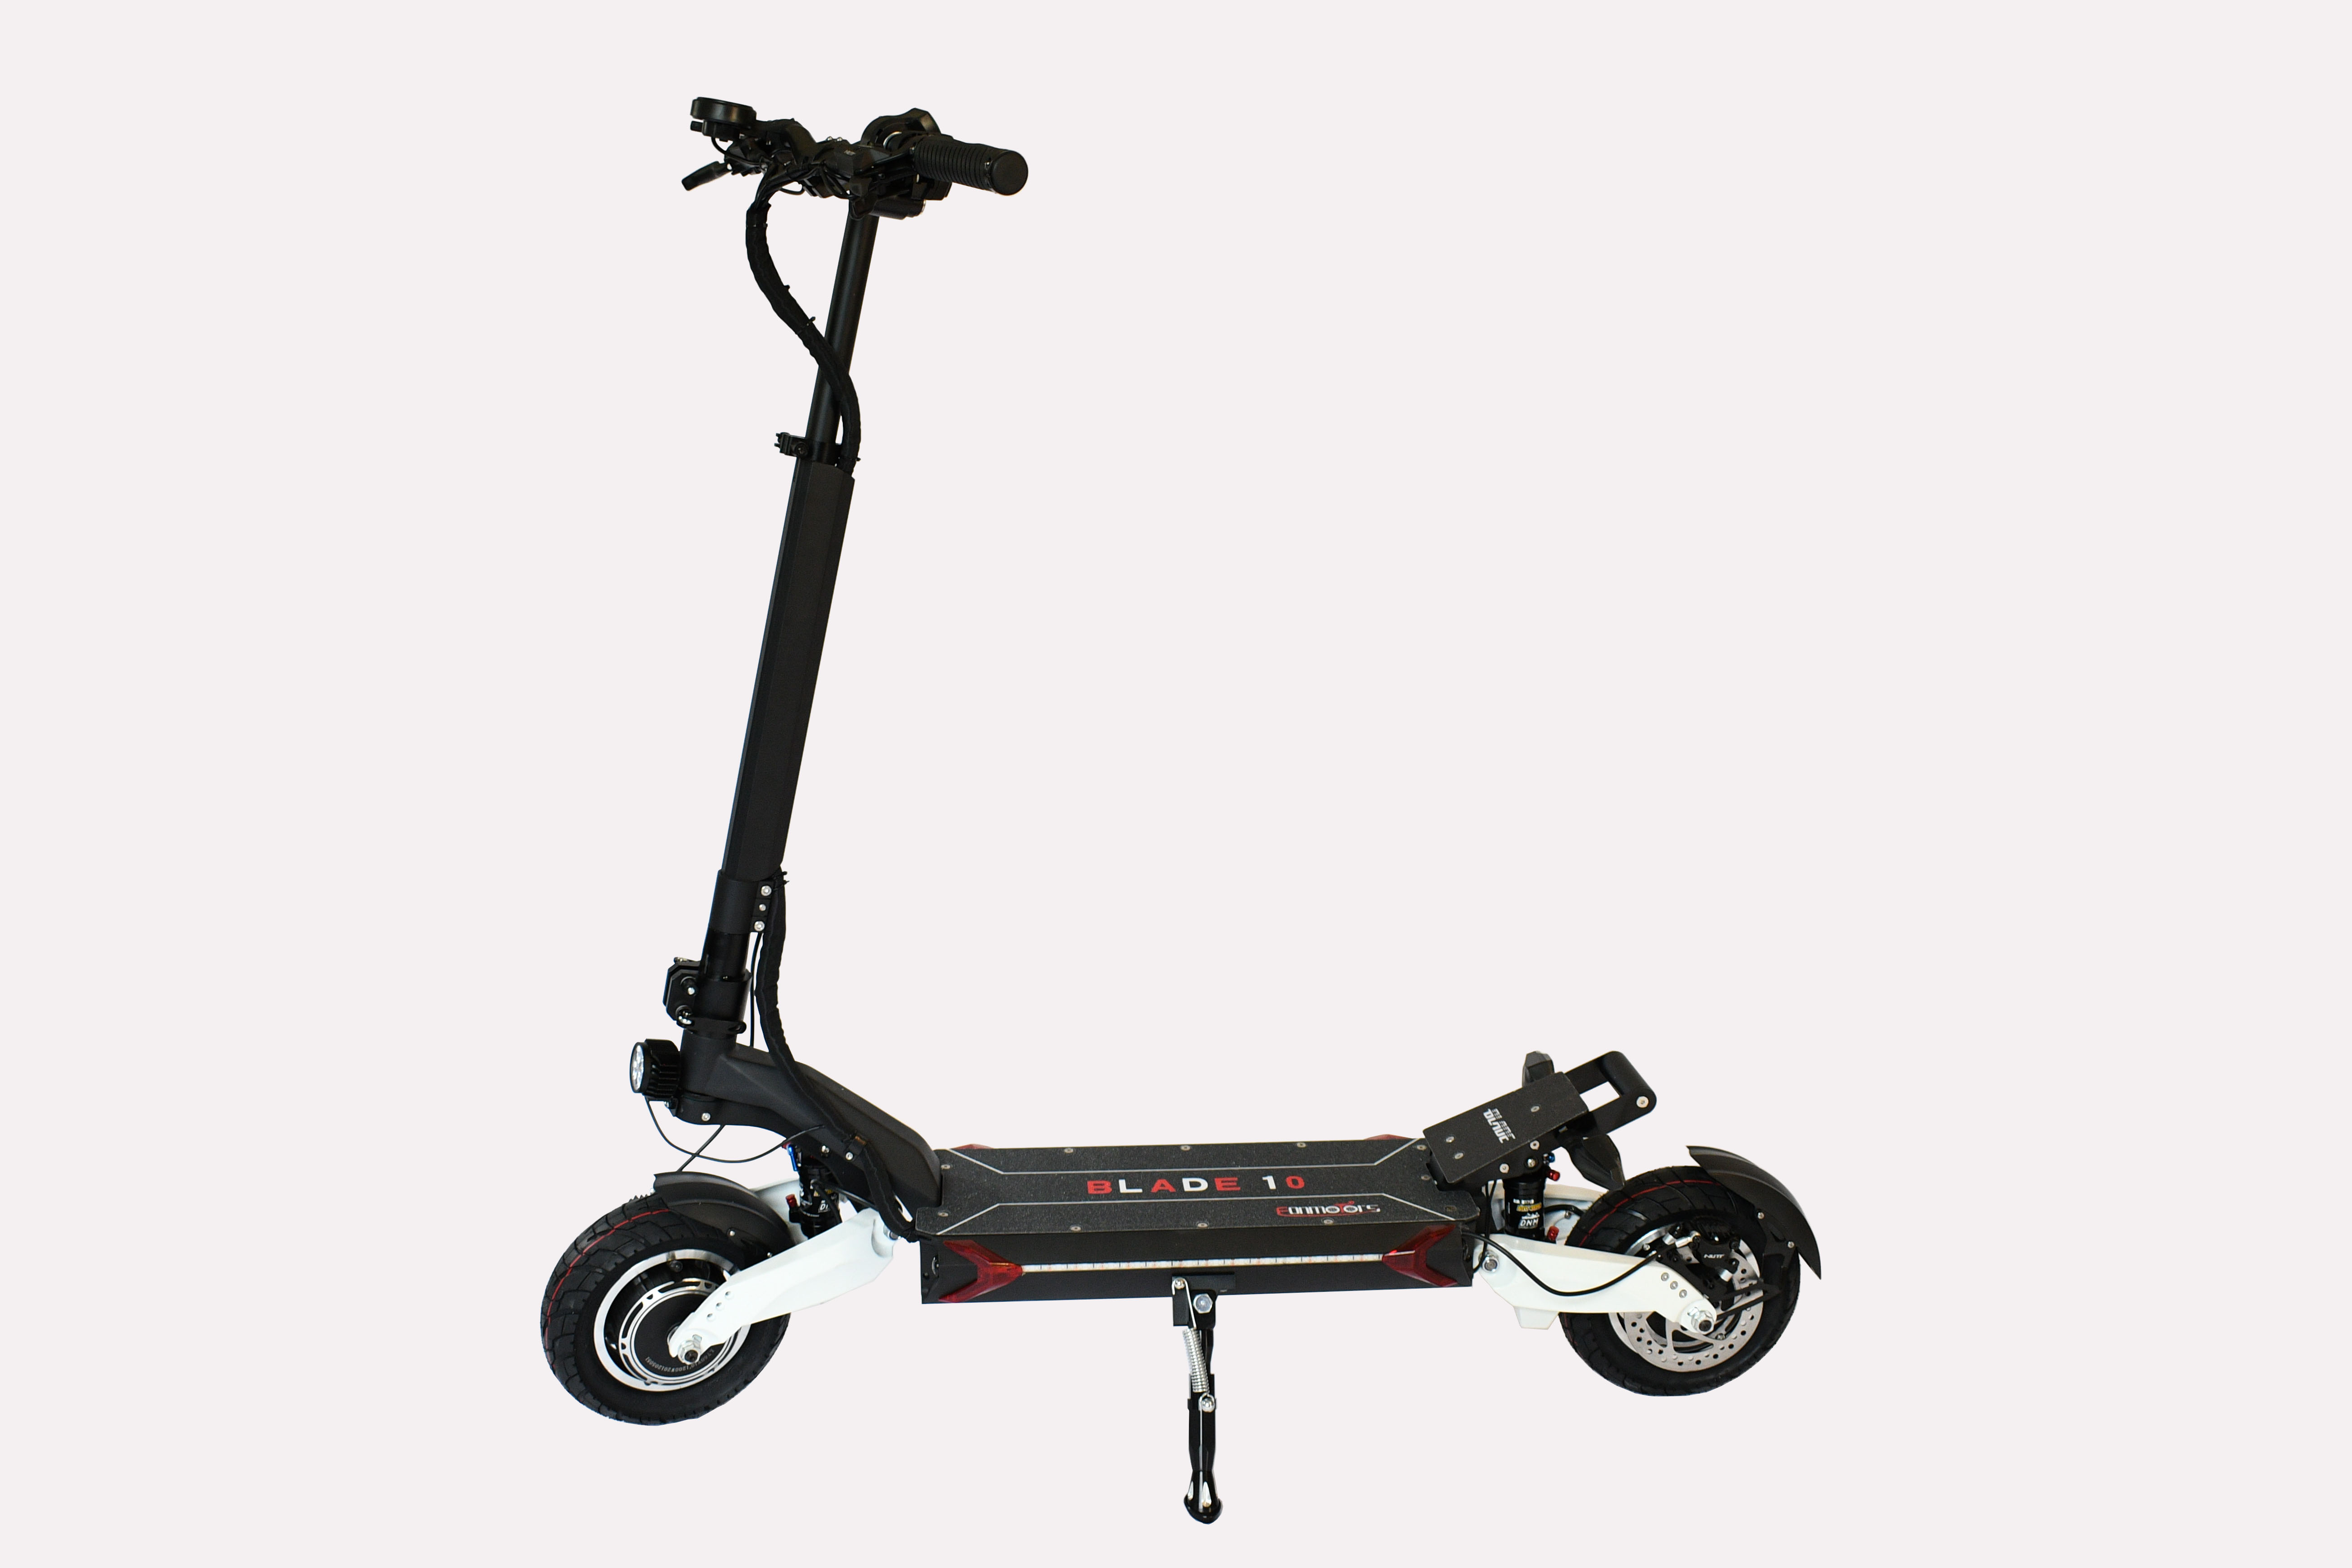 BLADE 10 ELECTRIC SCOOTER CHARGING PORT WE HAVE MORE BLADE 10 PARTS